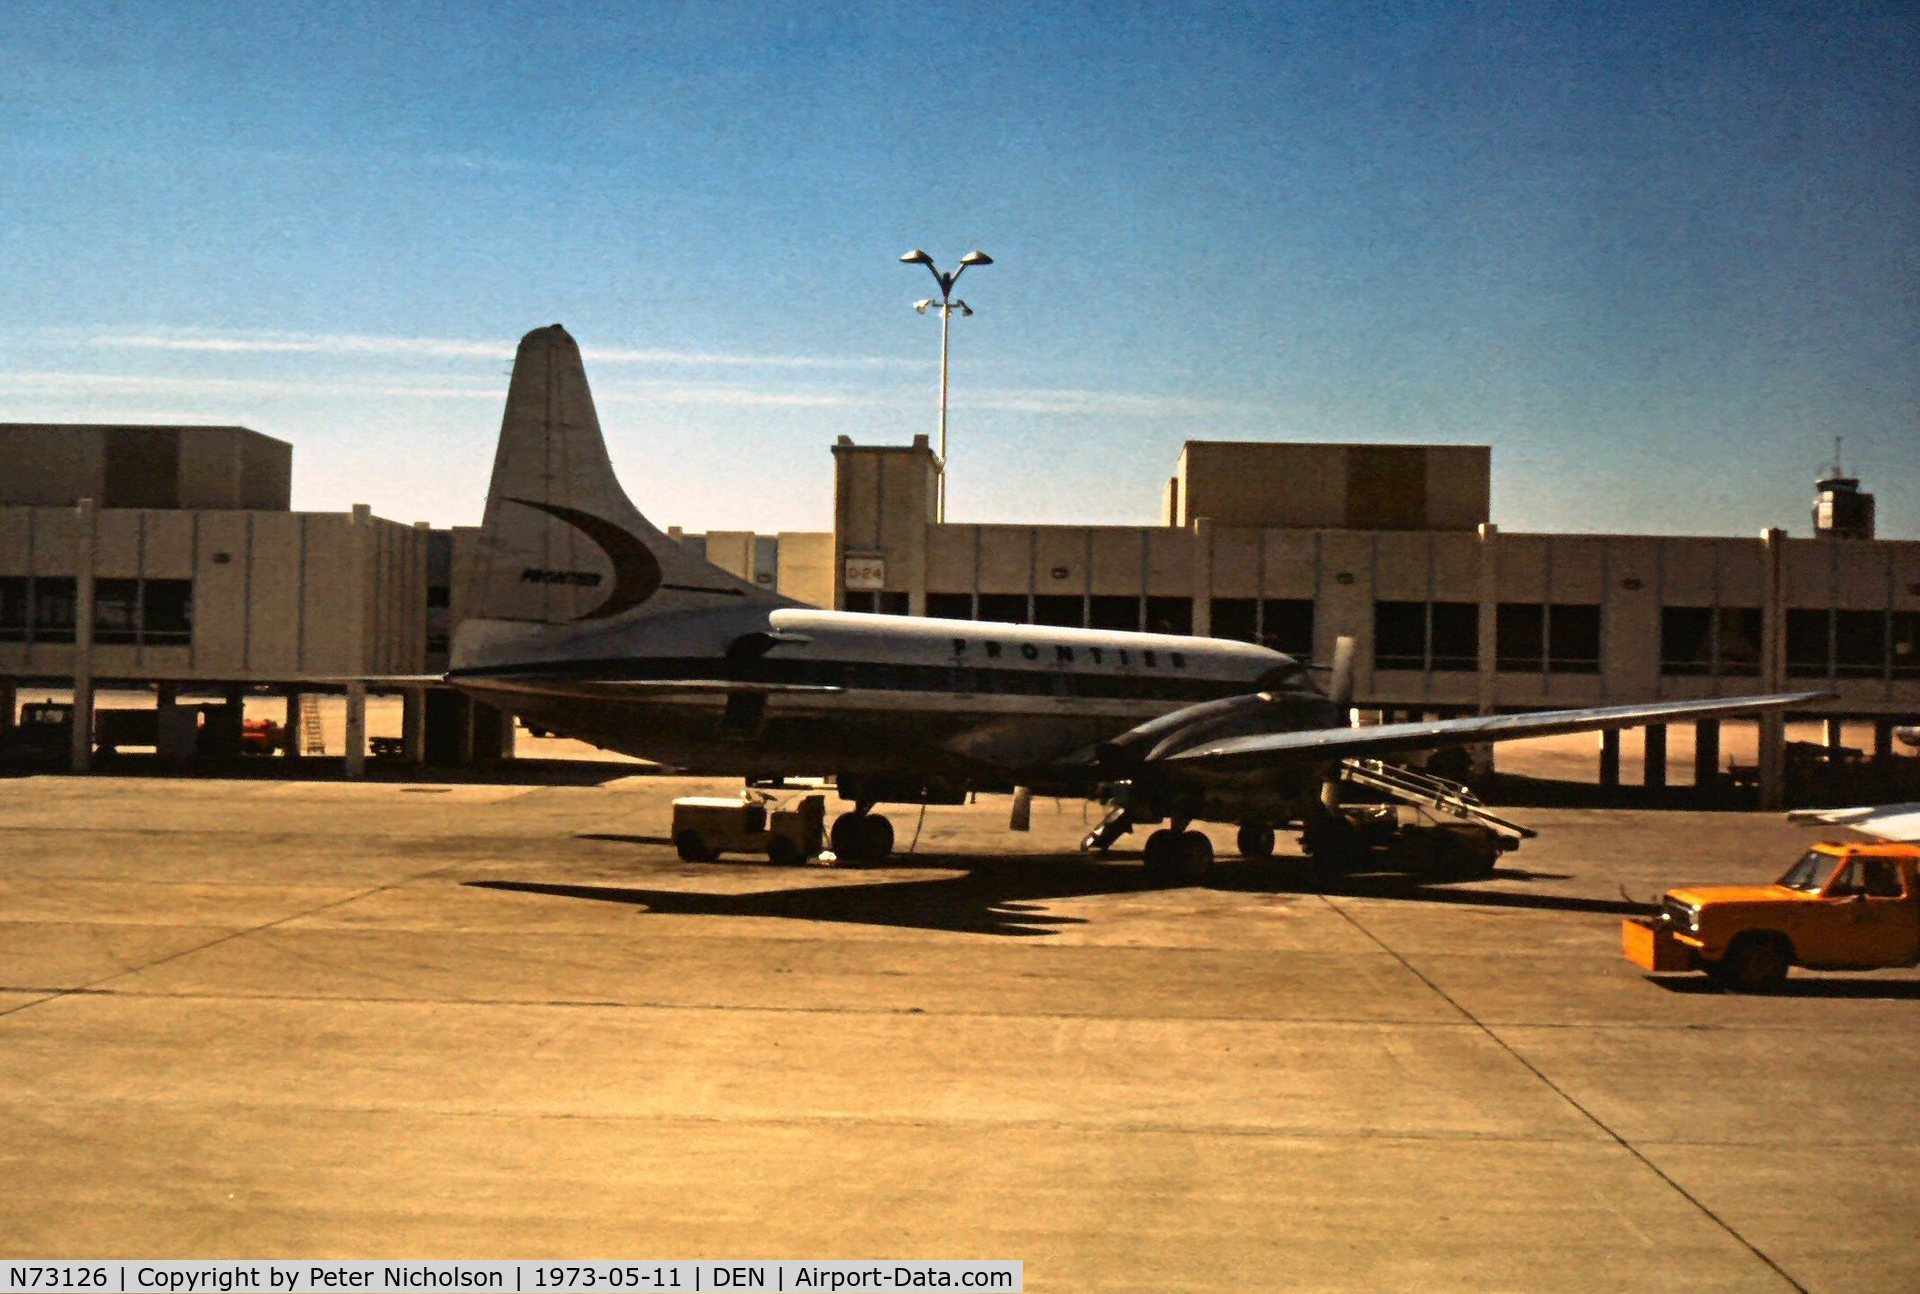 N73126, 1953 Convair 580 C/N 53, Operated as a Convair 580 by Frontier Airlines in the Summer of 1973.